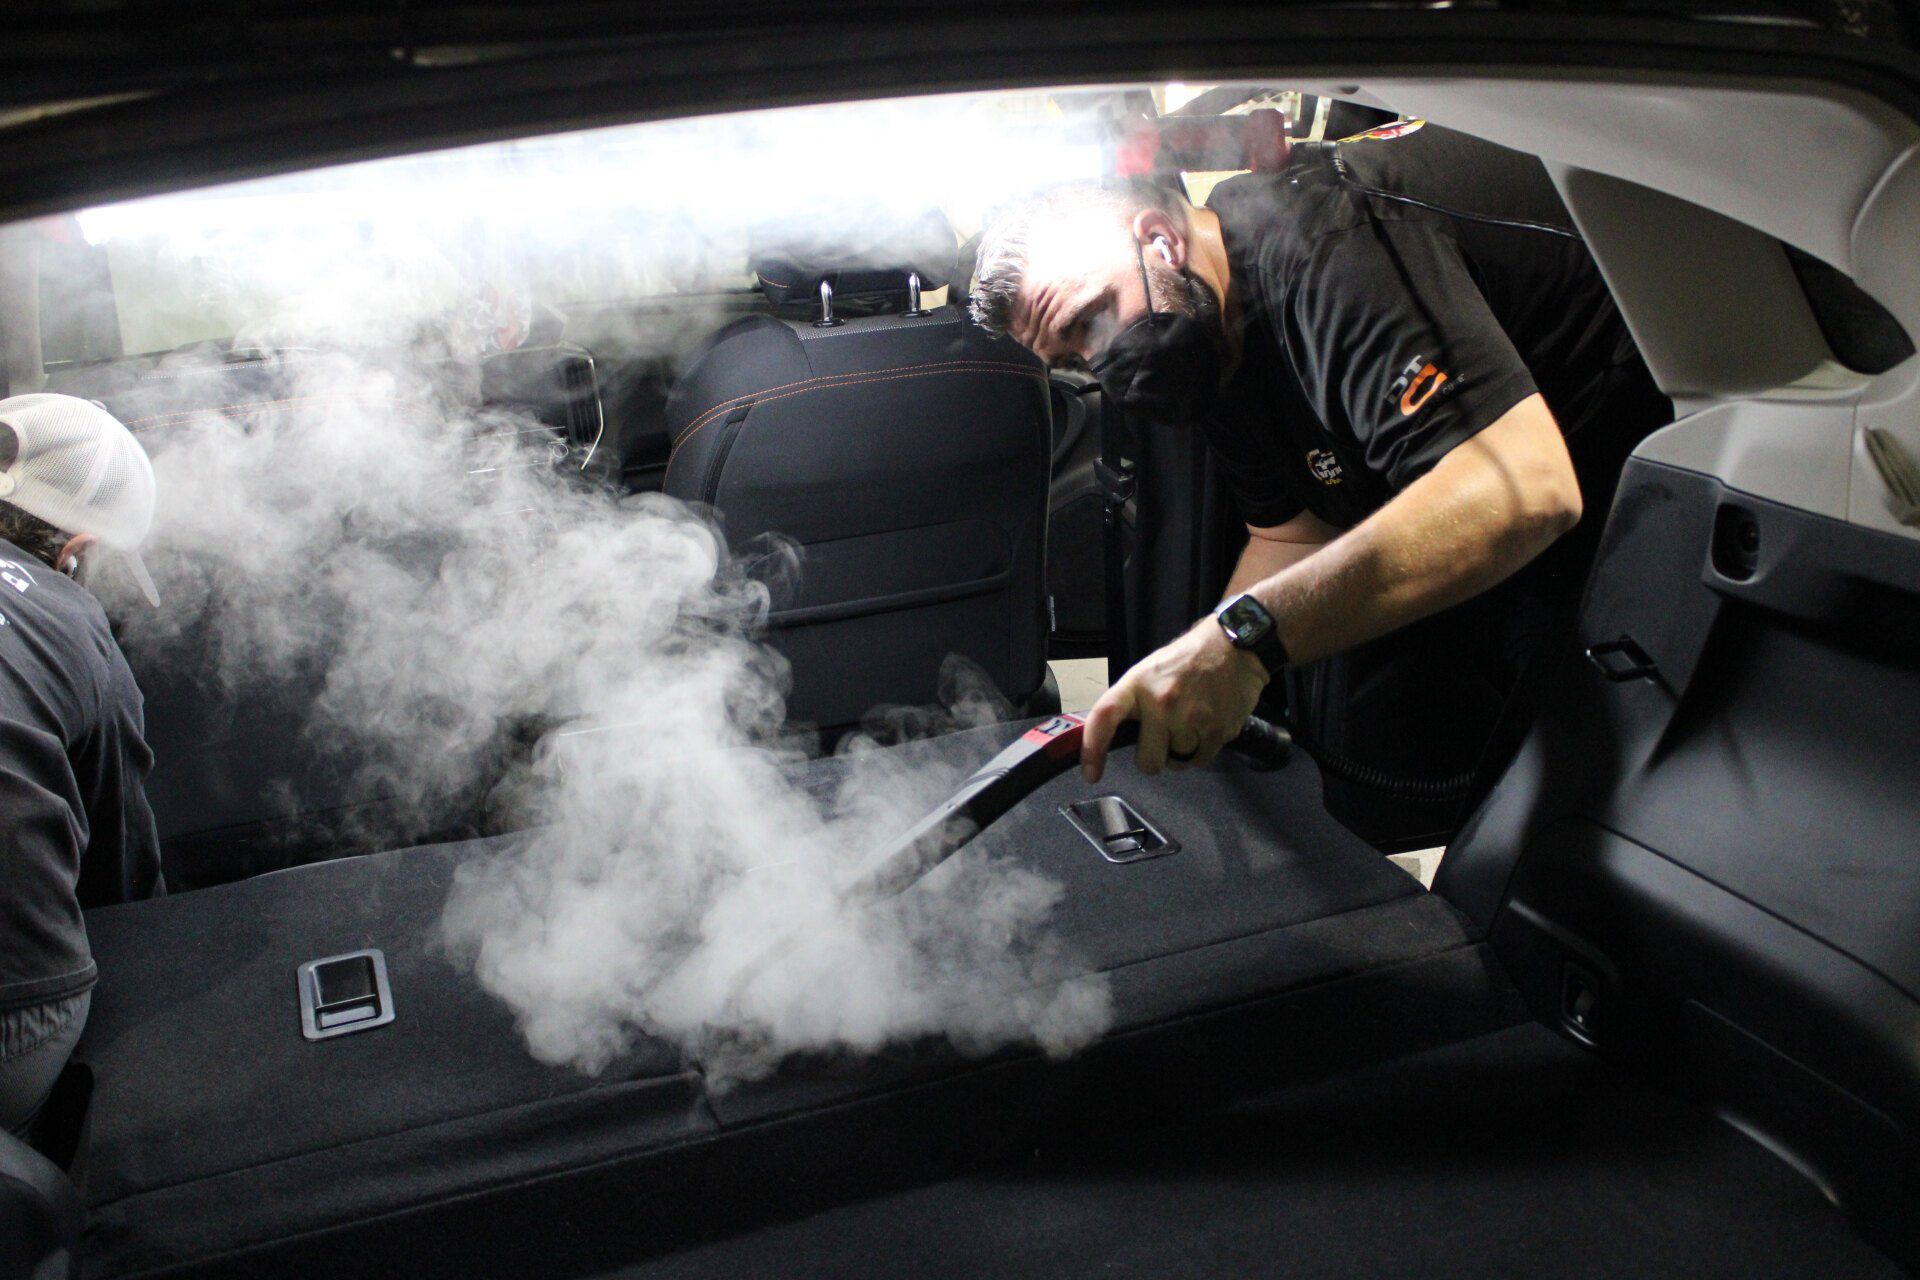 A man is cleaning the back seat of a car with a steam cleaner.